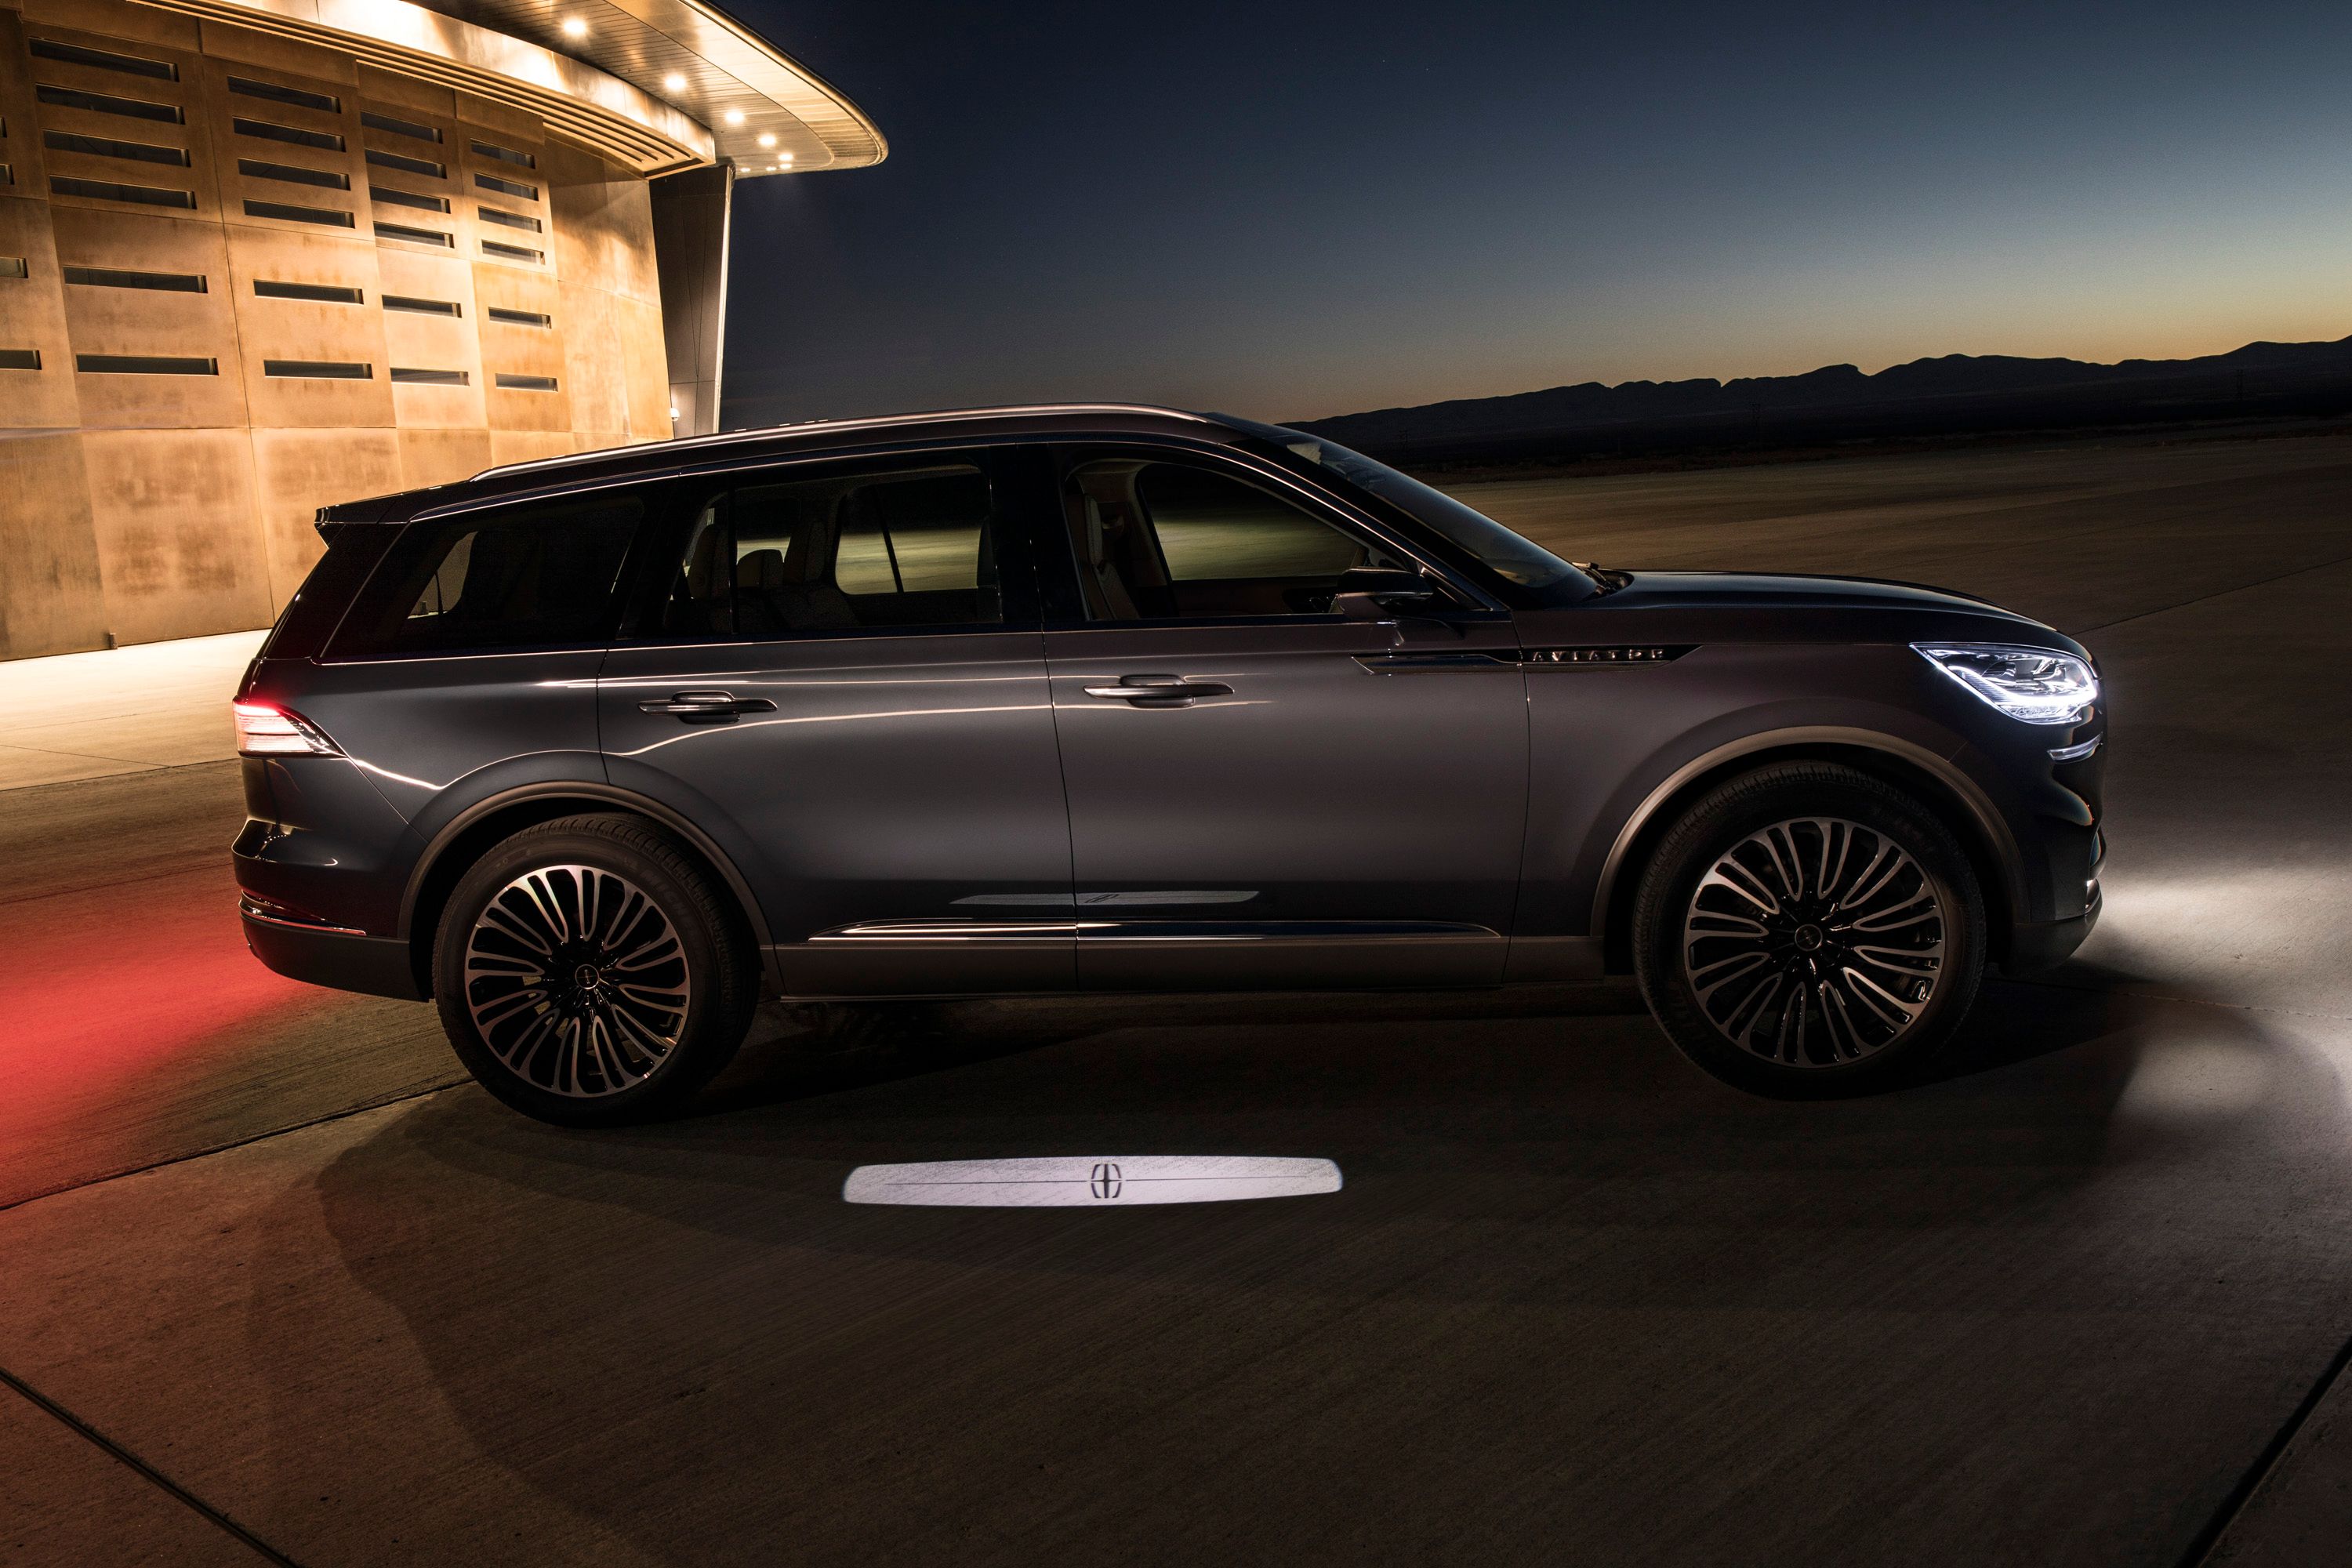 2018 Lincoln Aviator Uses Detroit Symphony Orchestra Music As Warning Tones